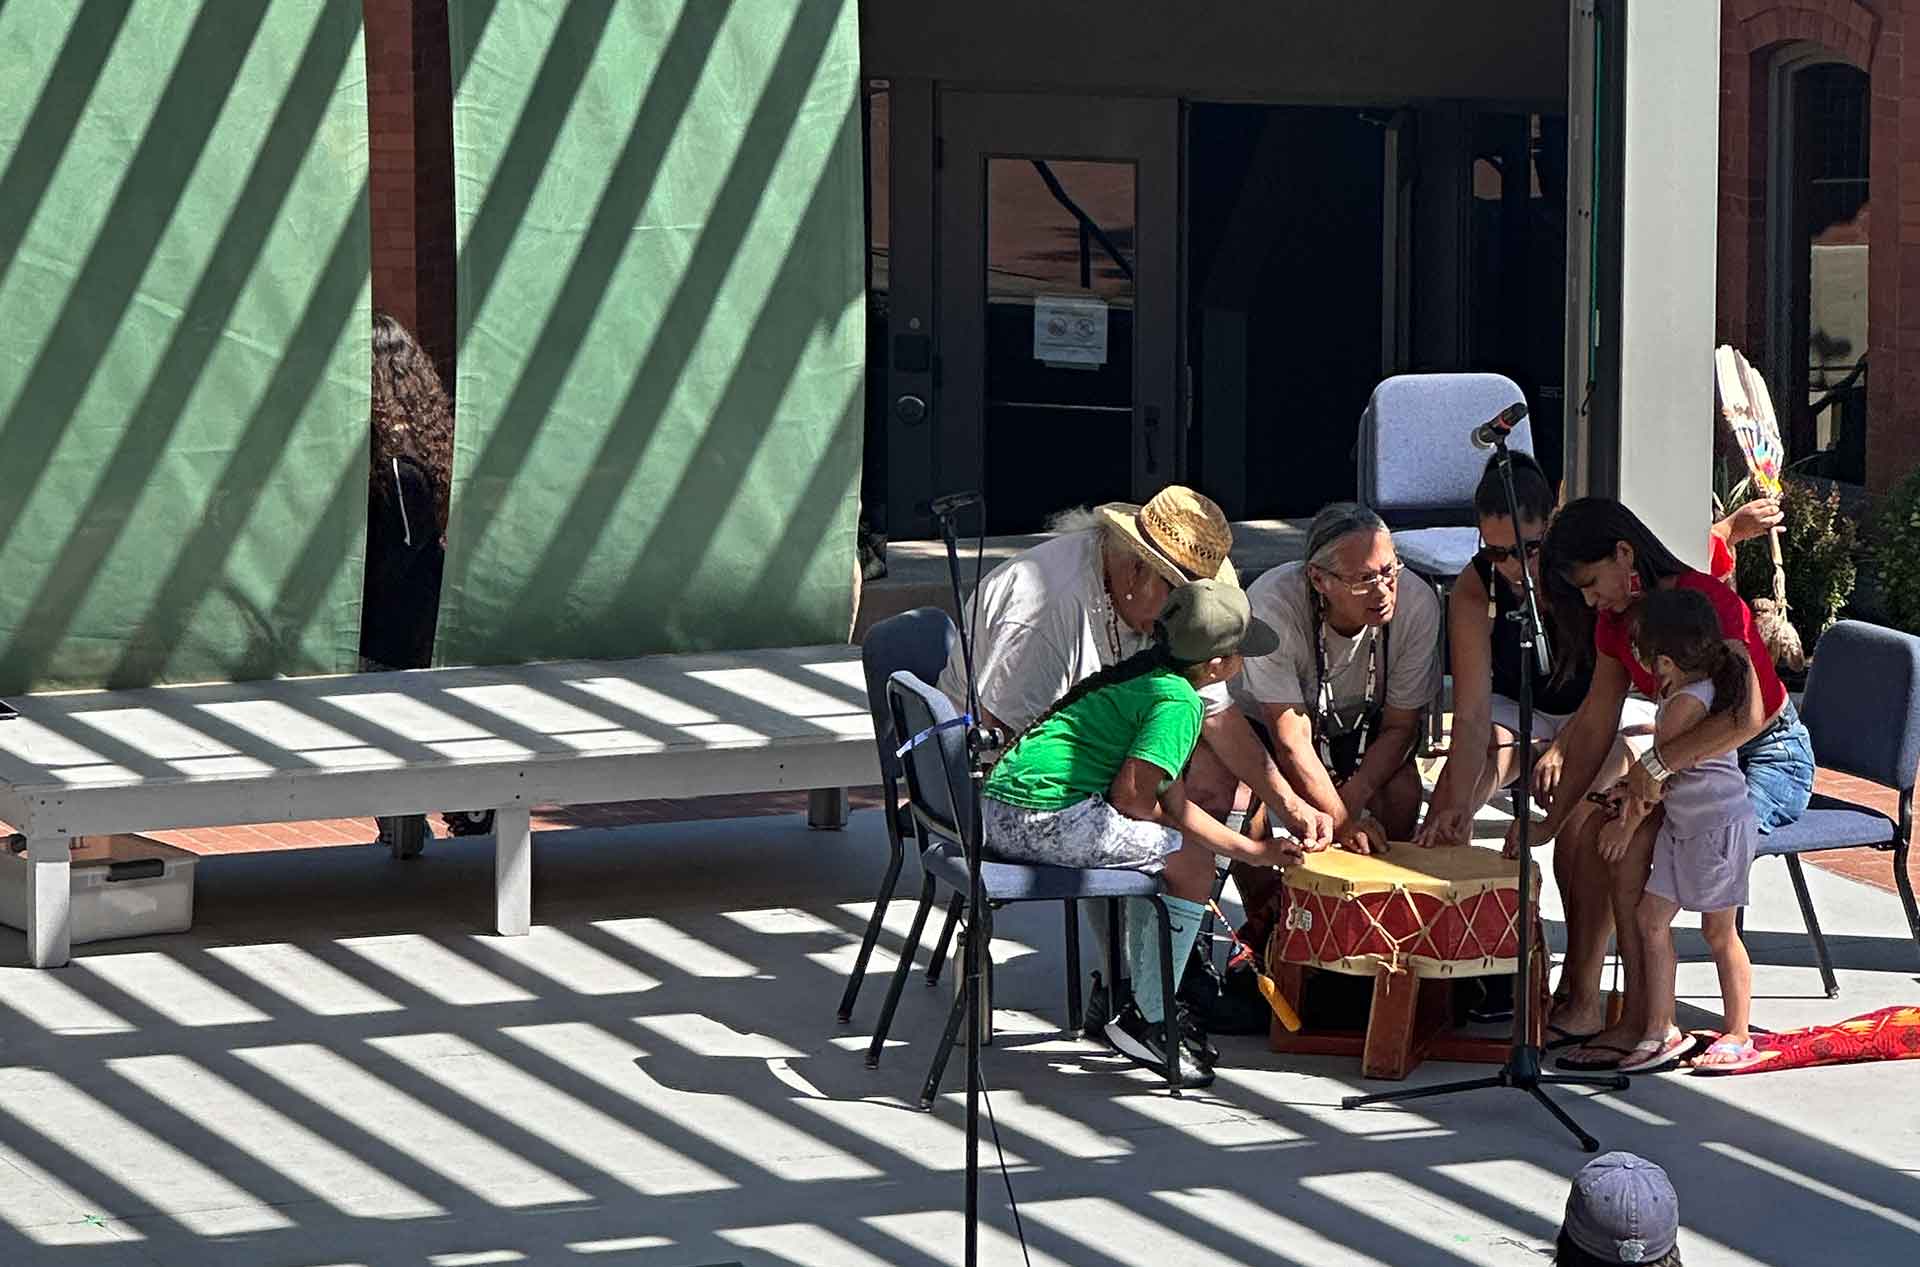 A group of people playing drums.